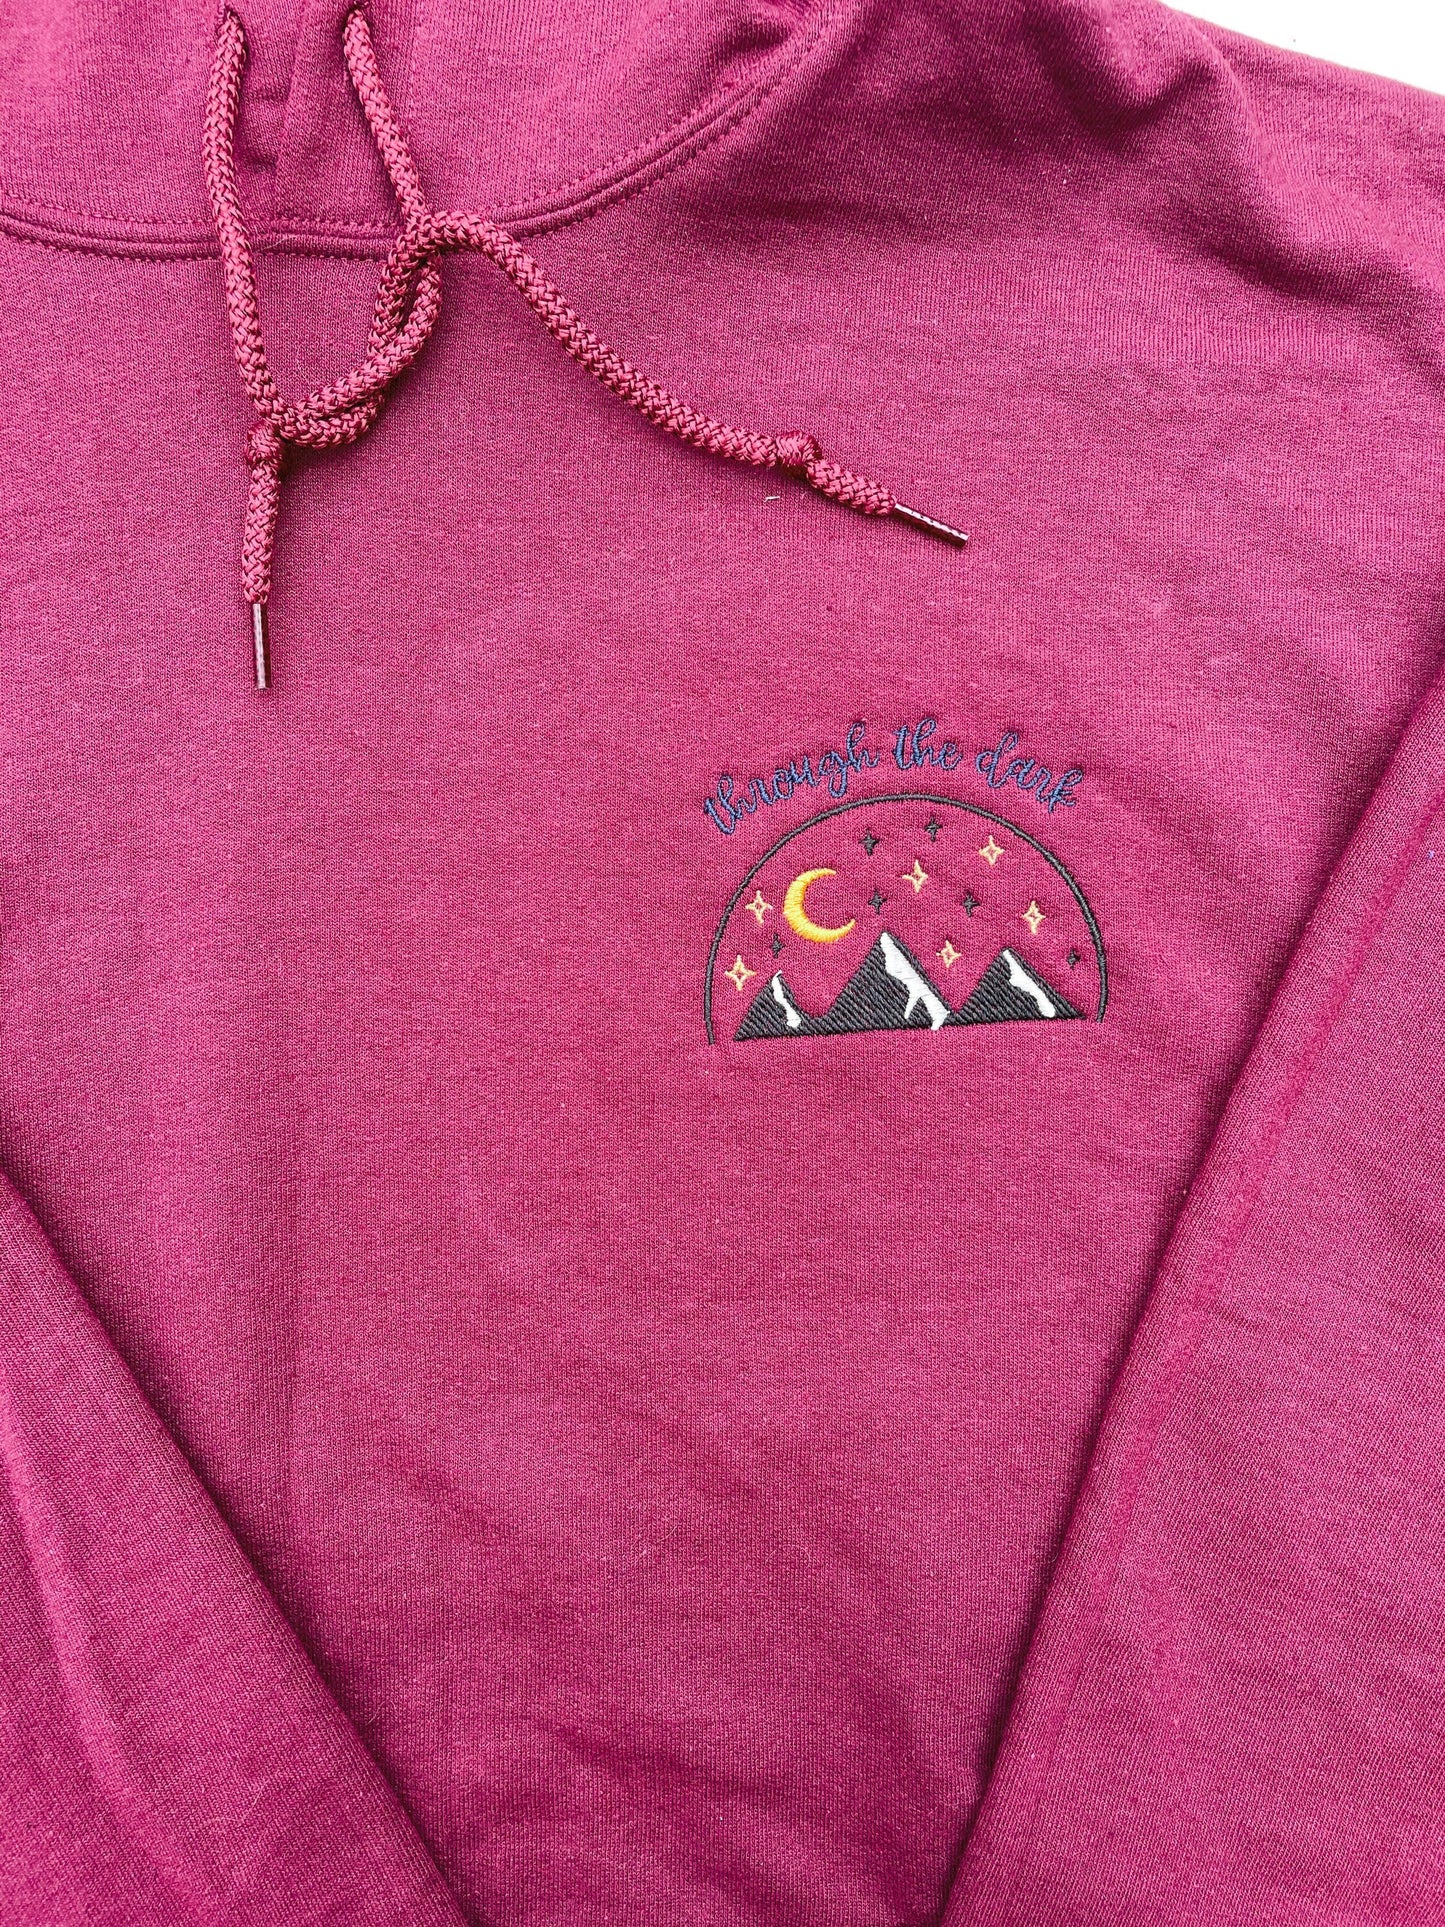 Through the Dark Mountains || Embroidered Crewneck and Hoodie